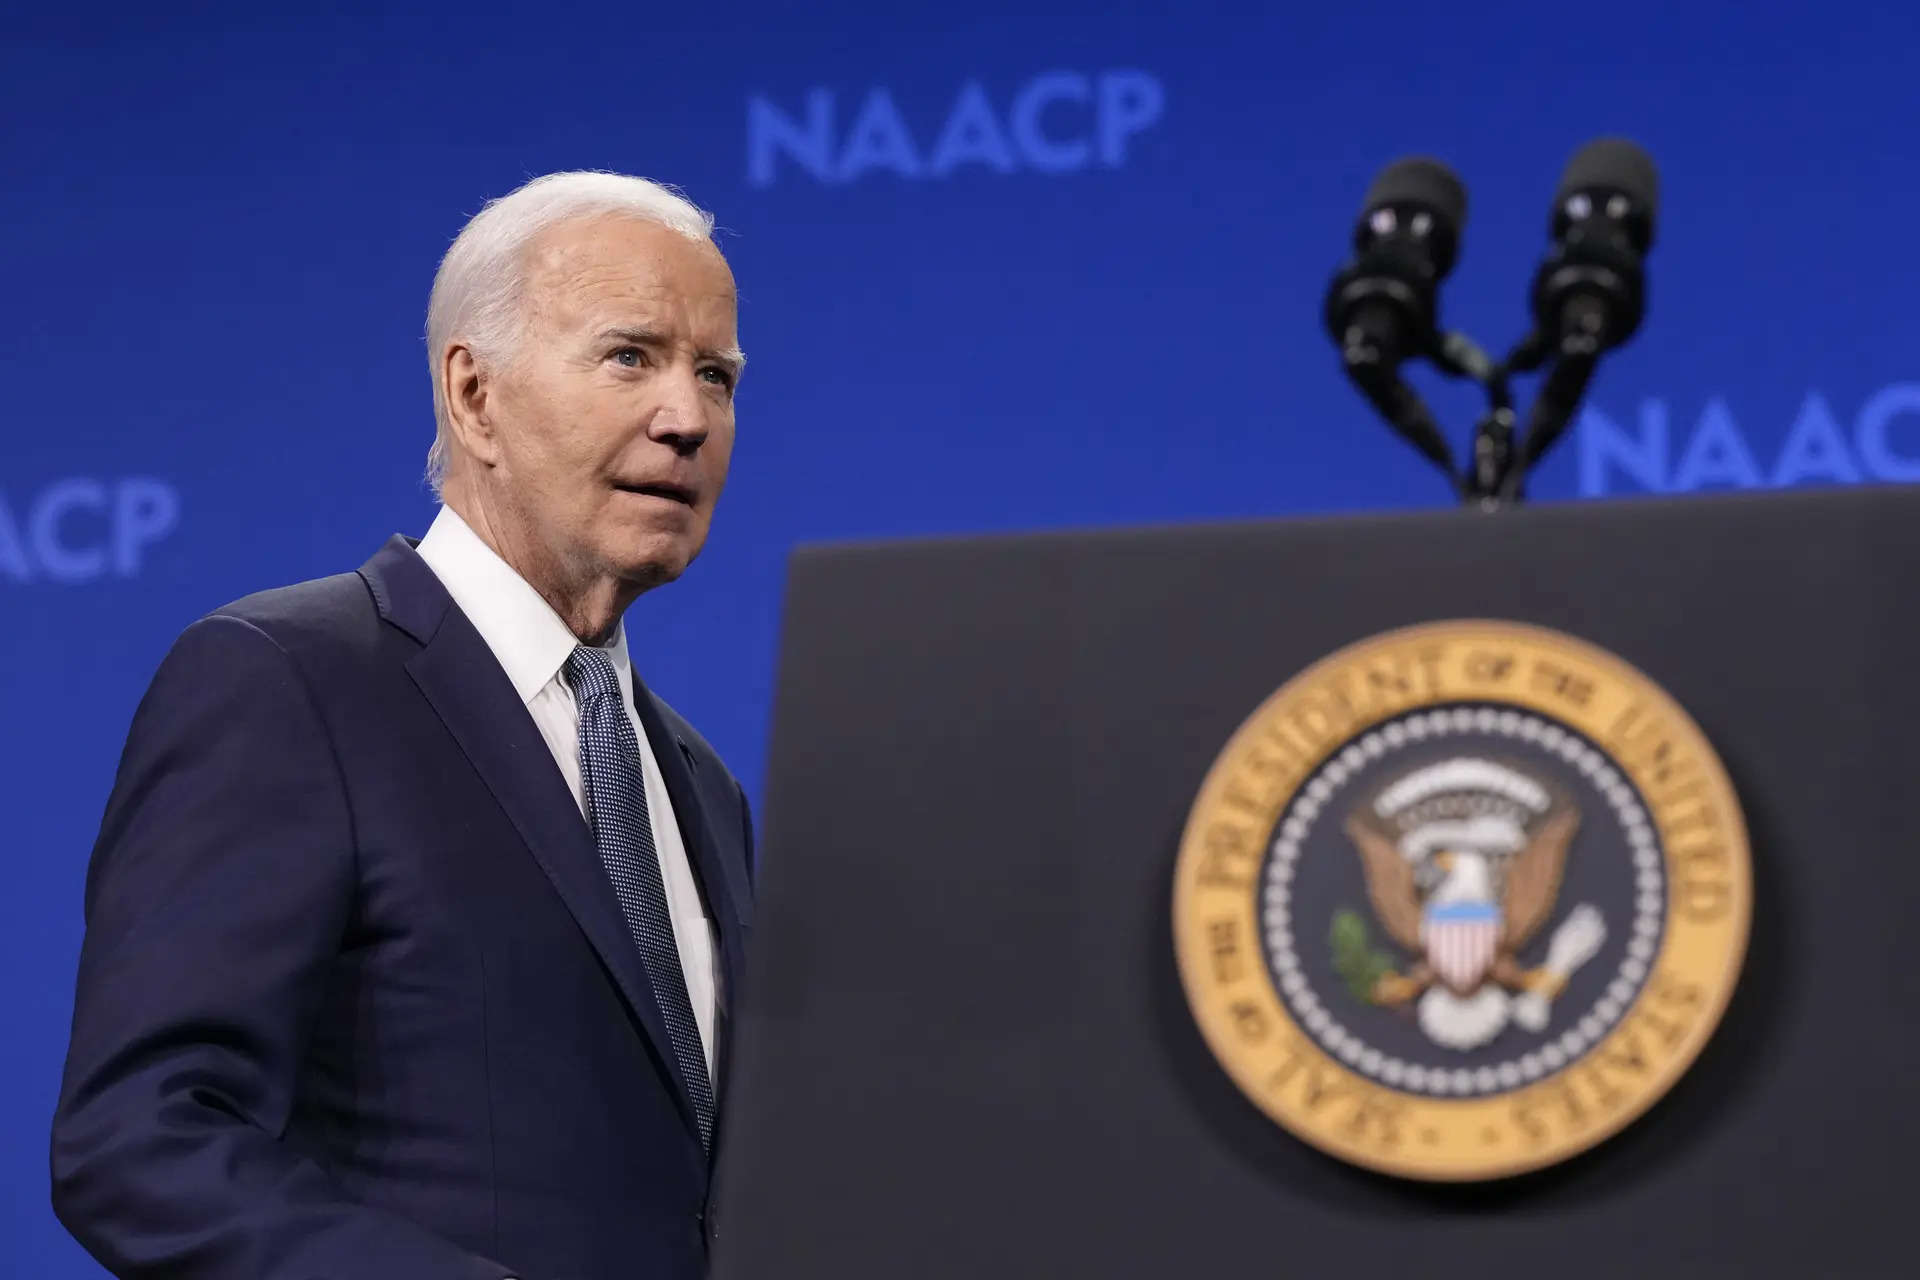 Biden to drop out of presidential race? Major announcement expected shortly 